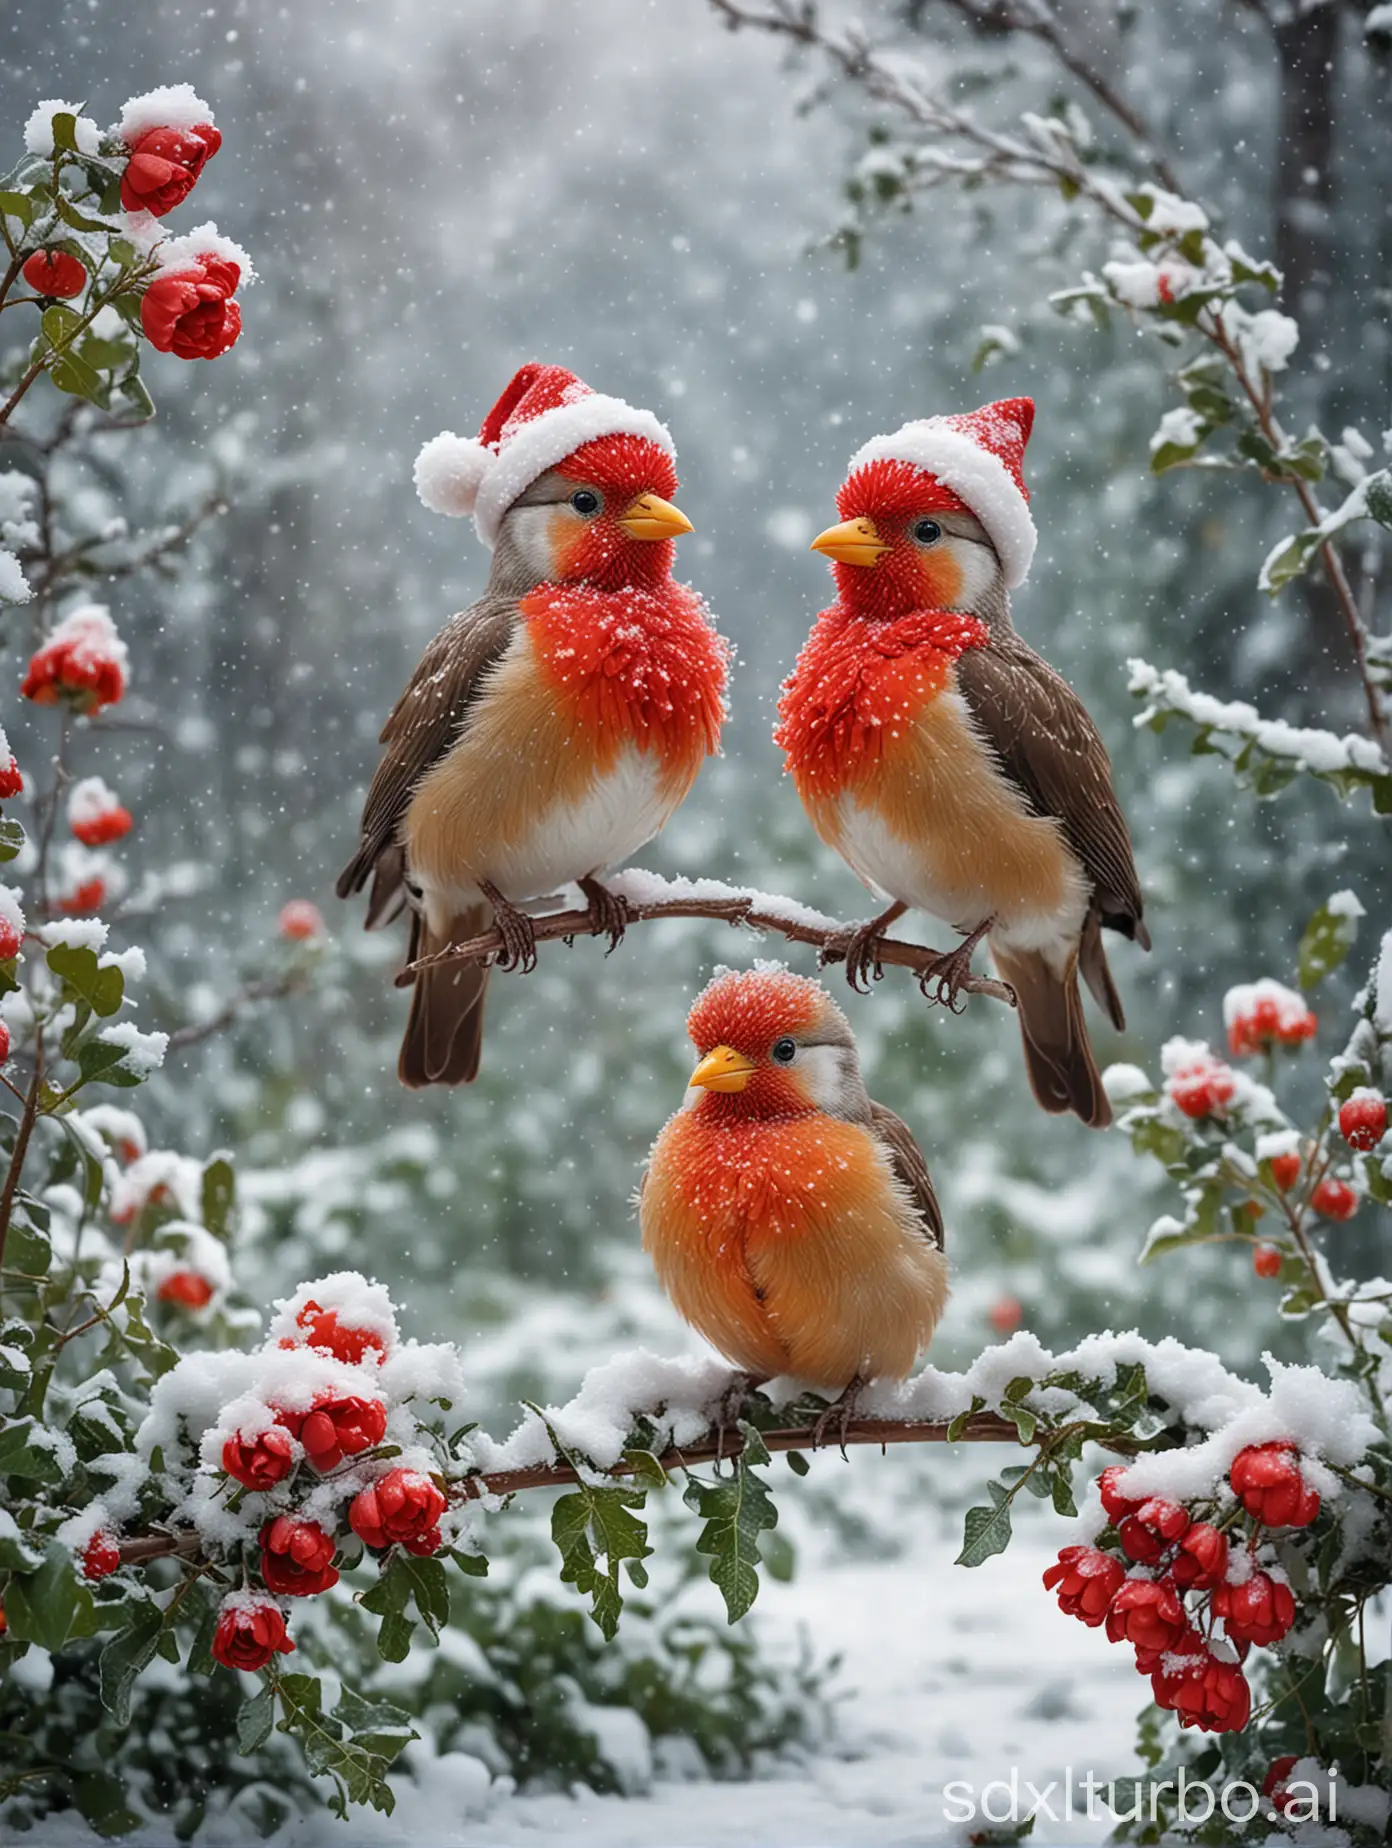 portrait of two colorful birds wearing a red knitted scarf and a santa hat on a branch with berries and ivy, standing in a vast snowy ice, snowing, wildflowers, daisies and red gerberas flowers, fairytale field with snow